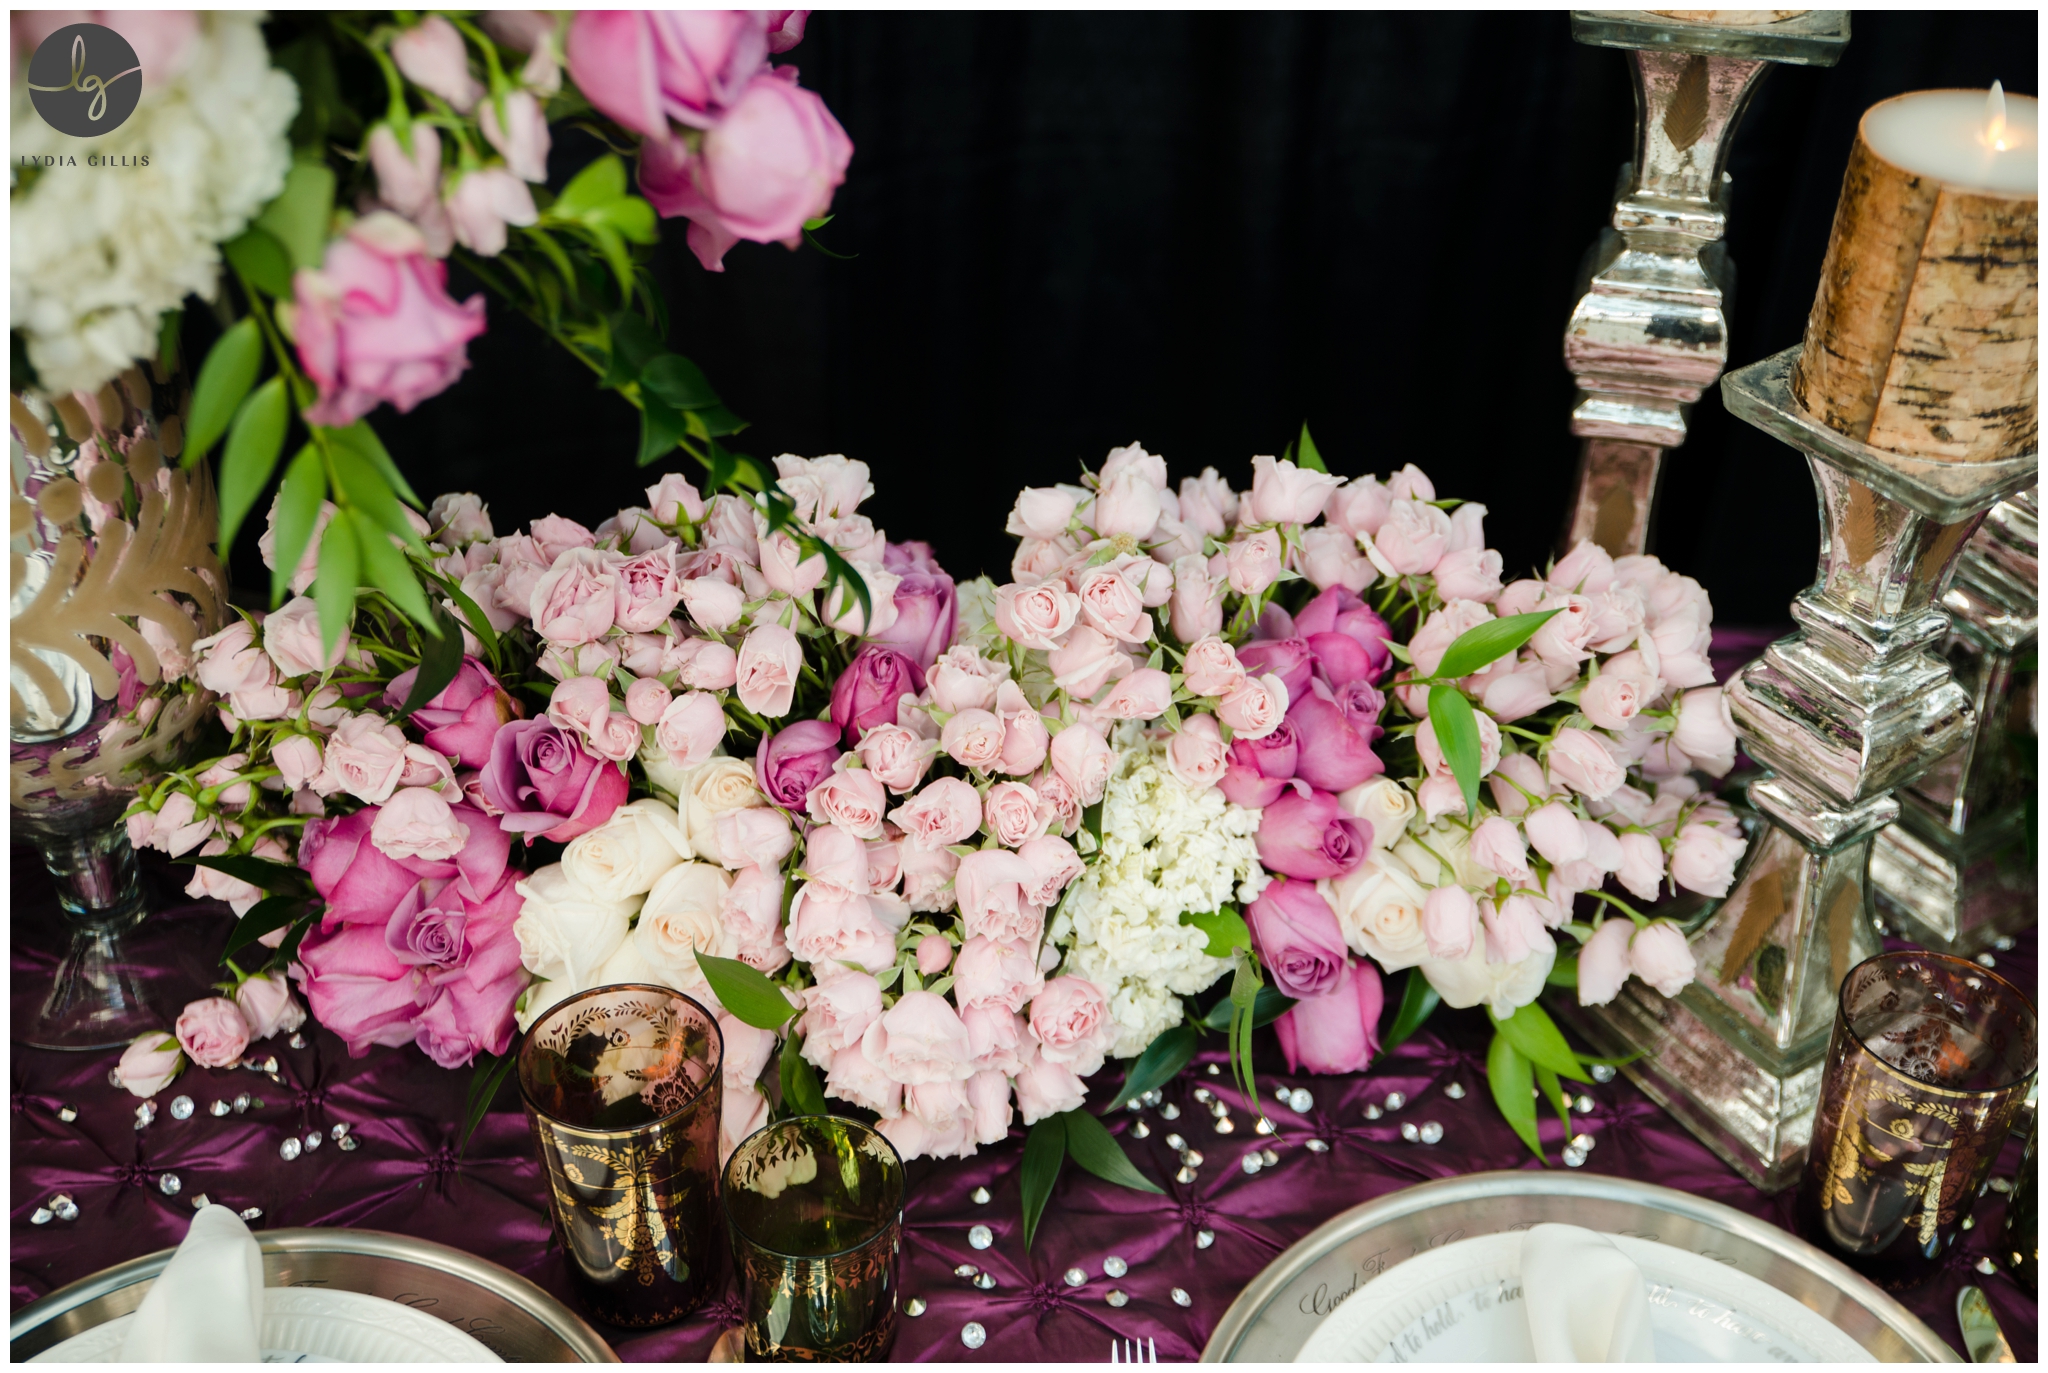 wedding details, wedding planner, luxury wedding, pulpier theme wedding, purple and pink roses, the perfect occasion | Lydia Gillis Photographer